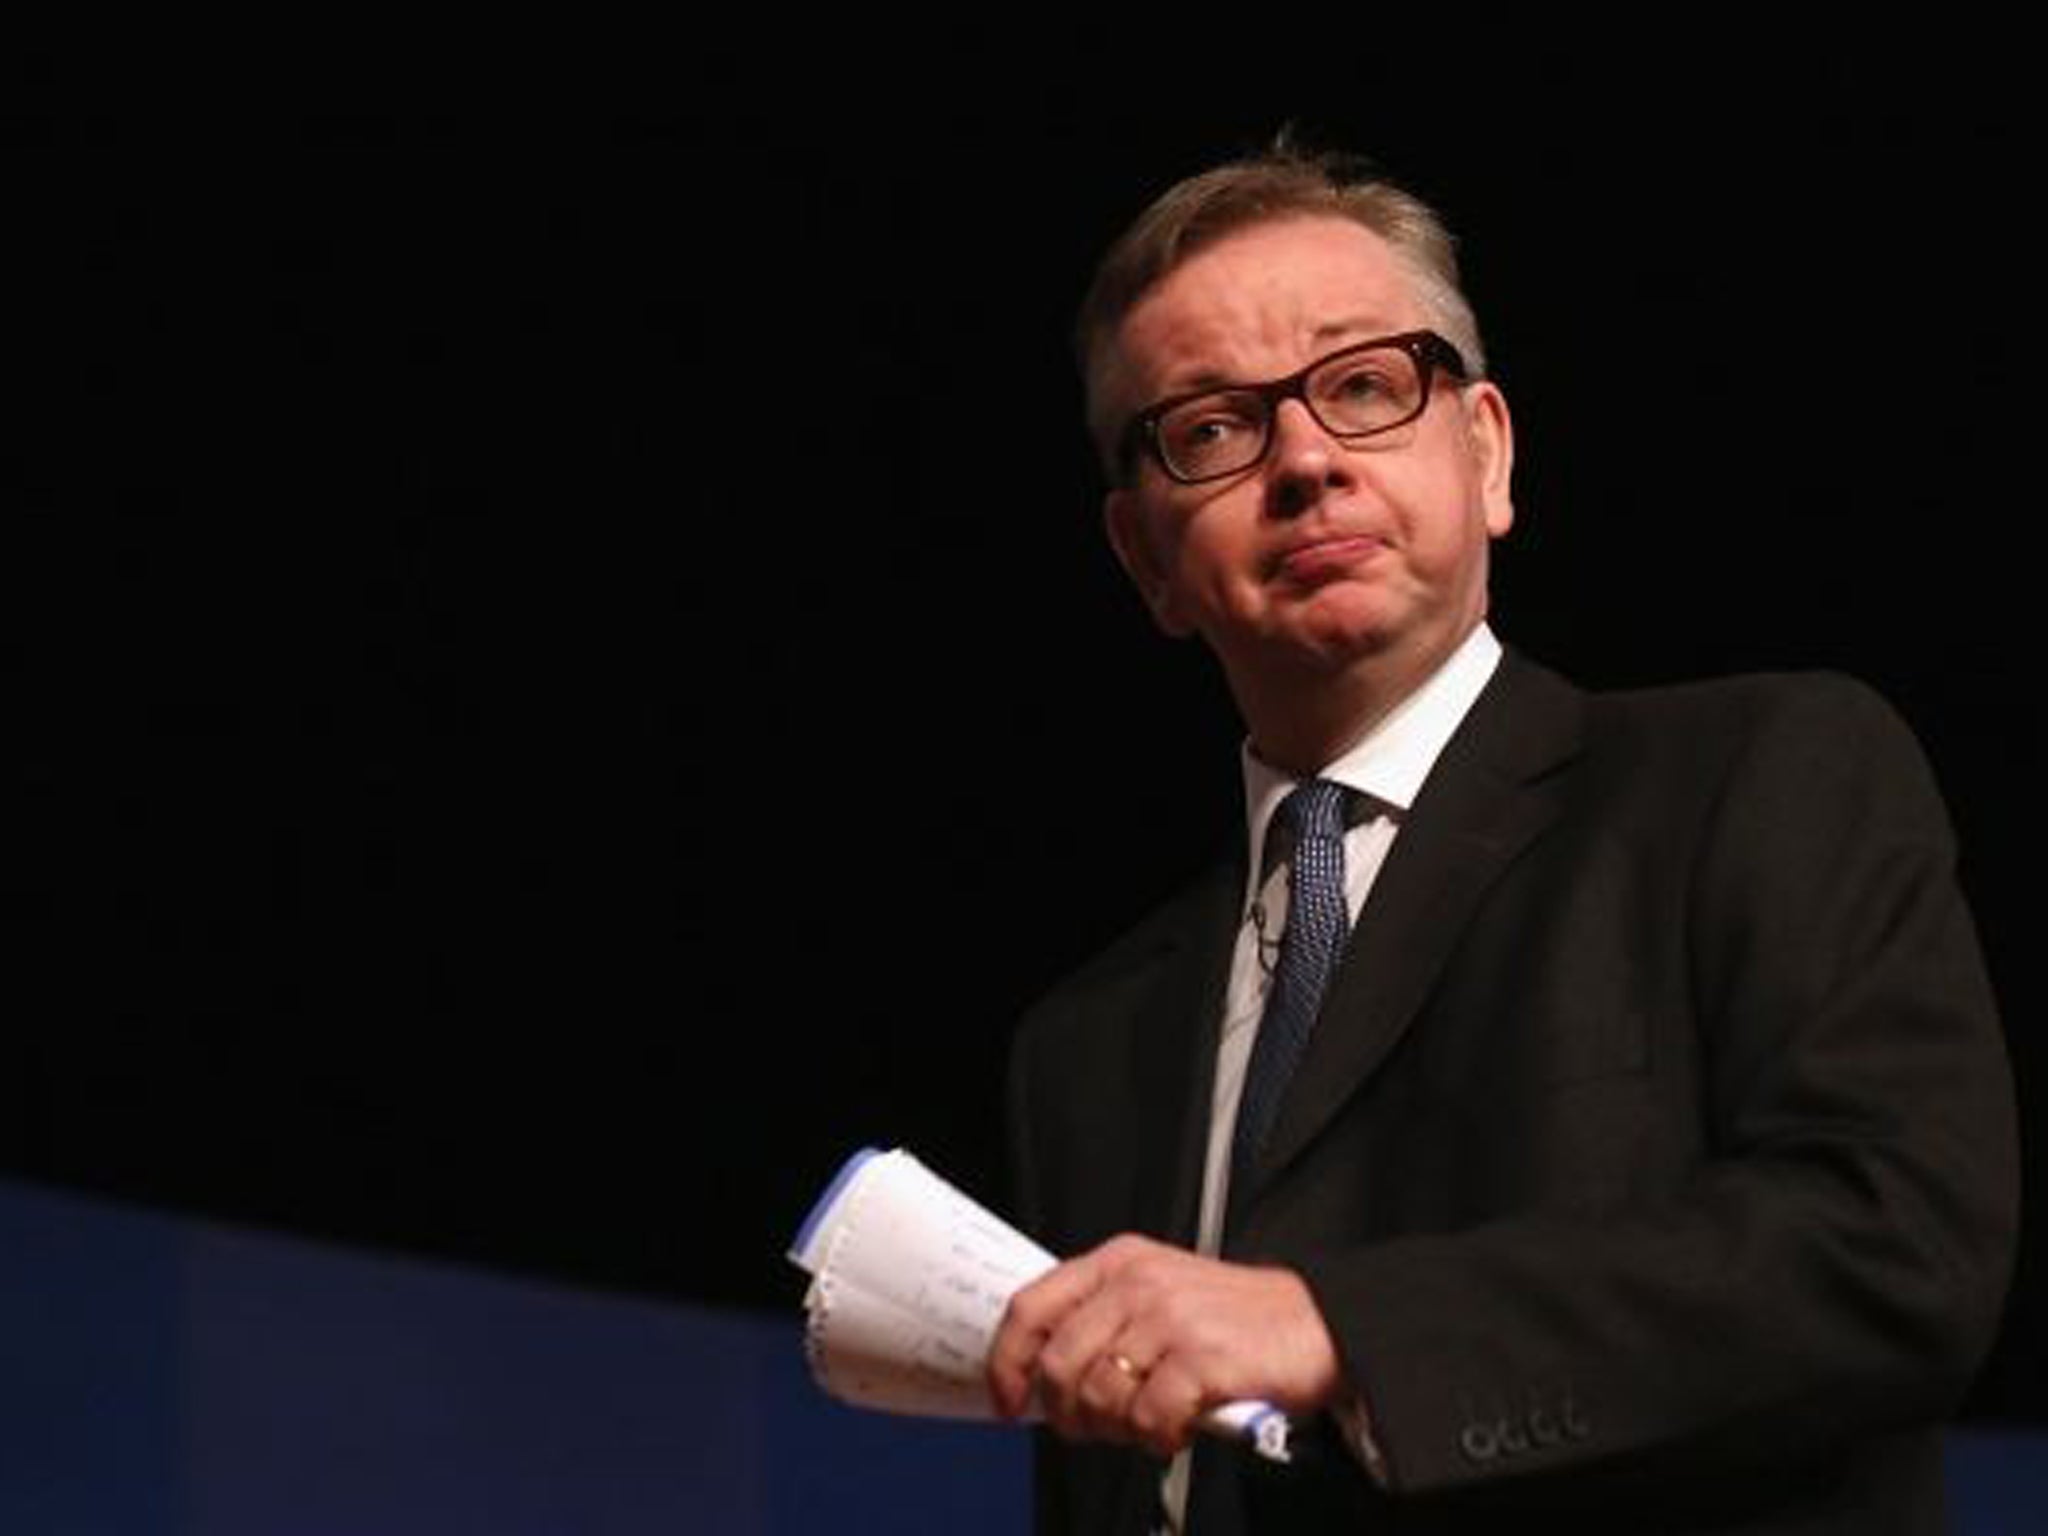 The motion of no confidence at the NUT conference at Liverpool was greeted with enthusiastic chants of 'Gove must go' by delegates